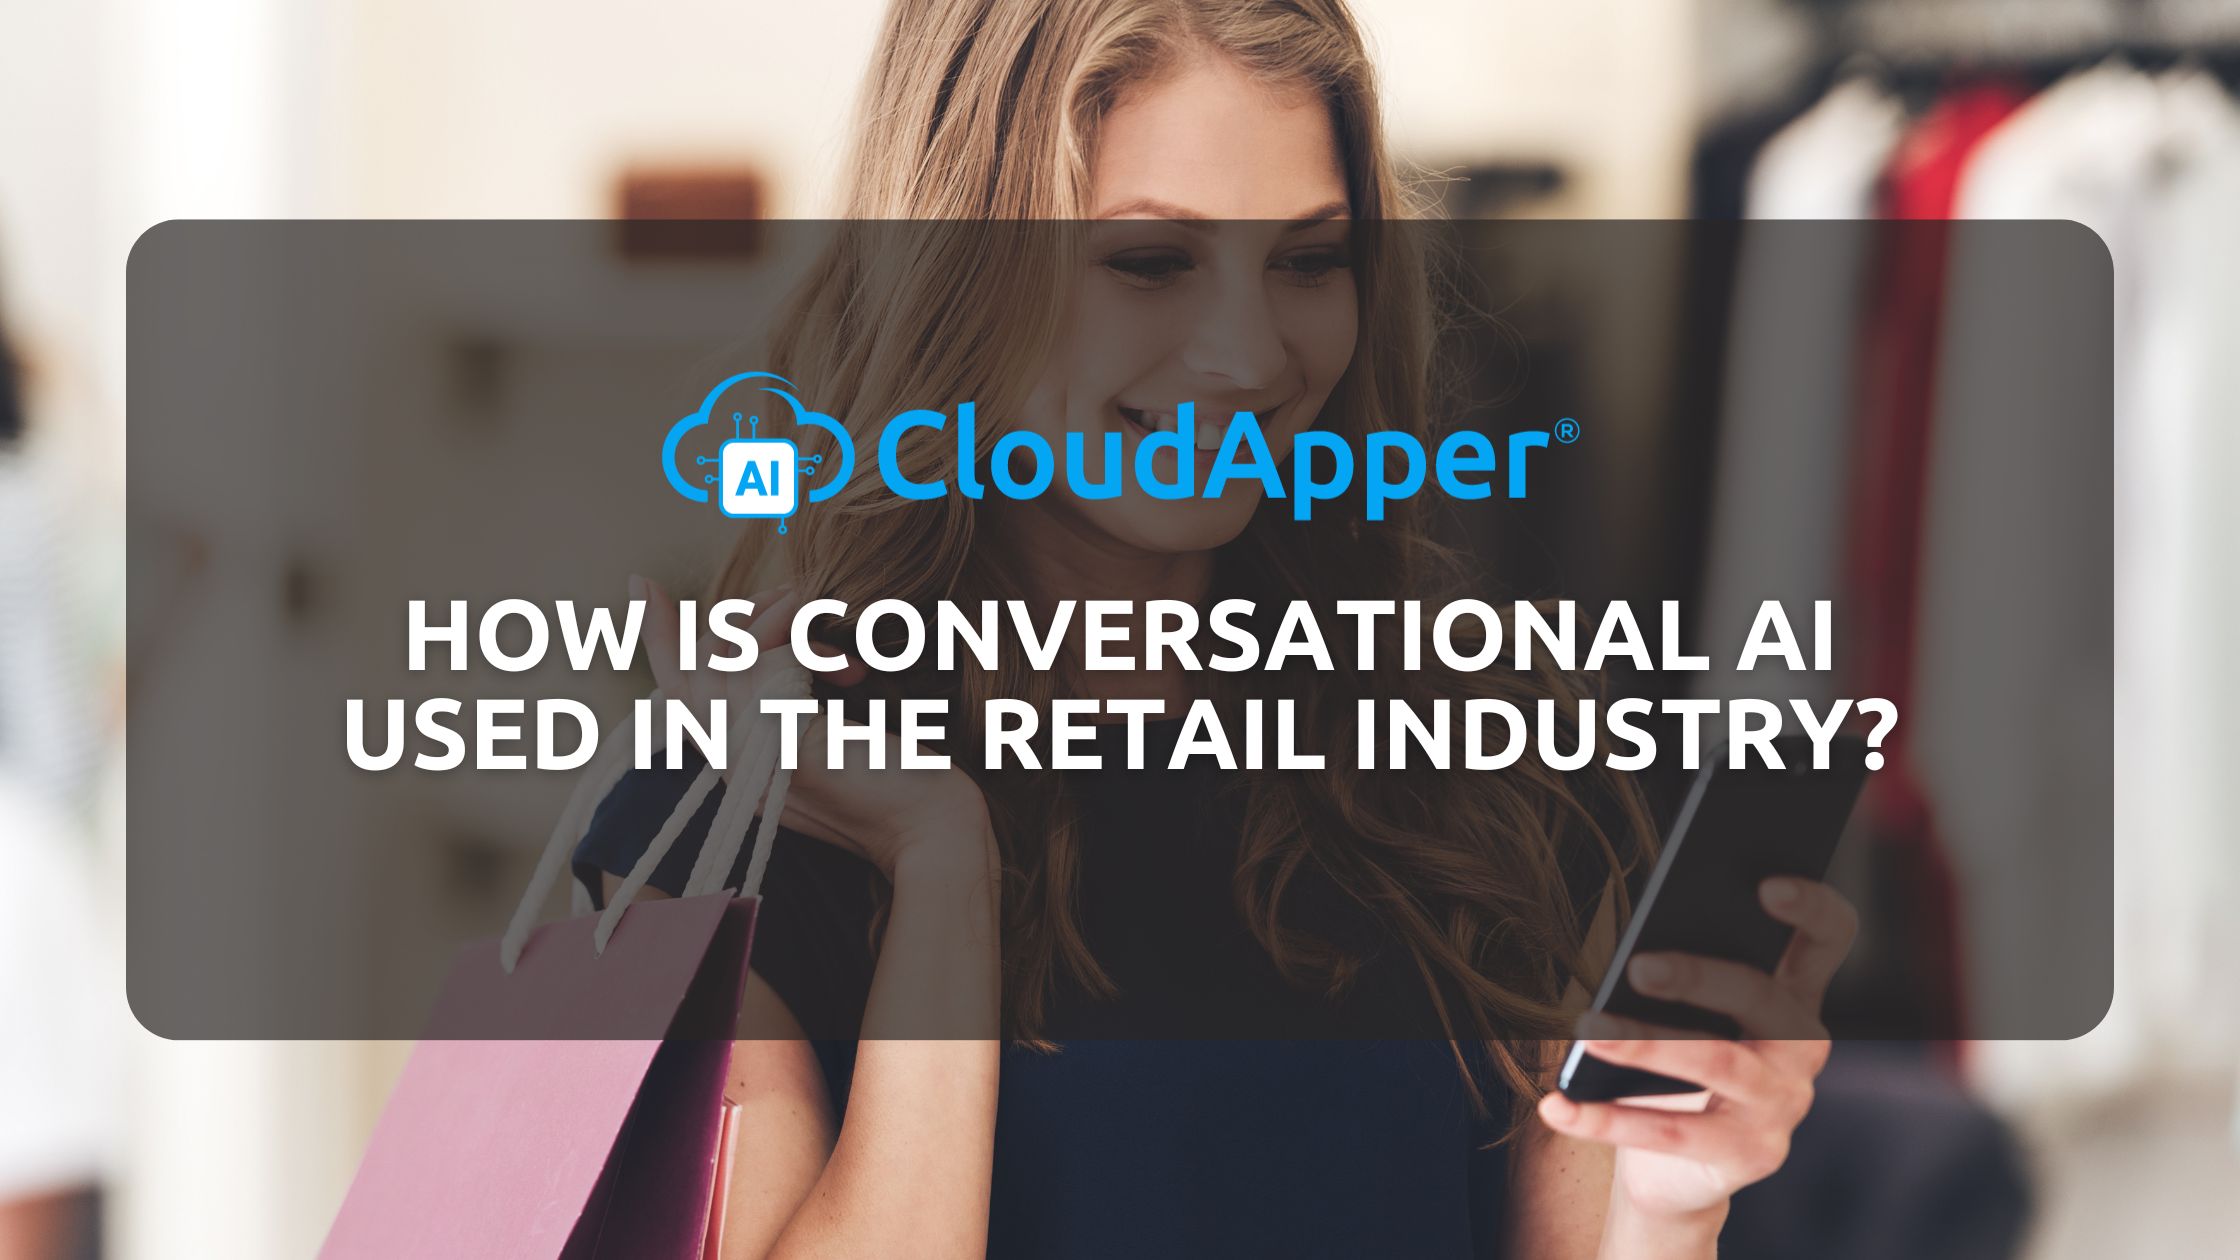 How Is Conversational AI Used in the Retail Industry